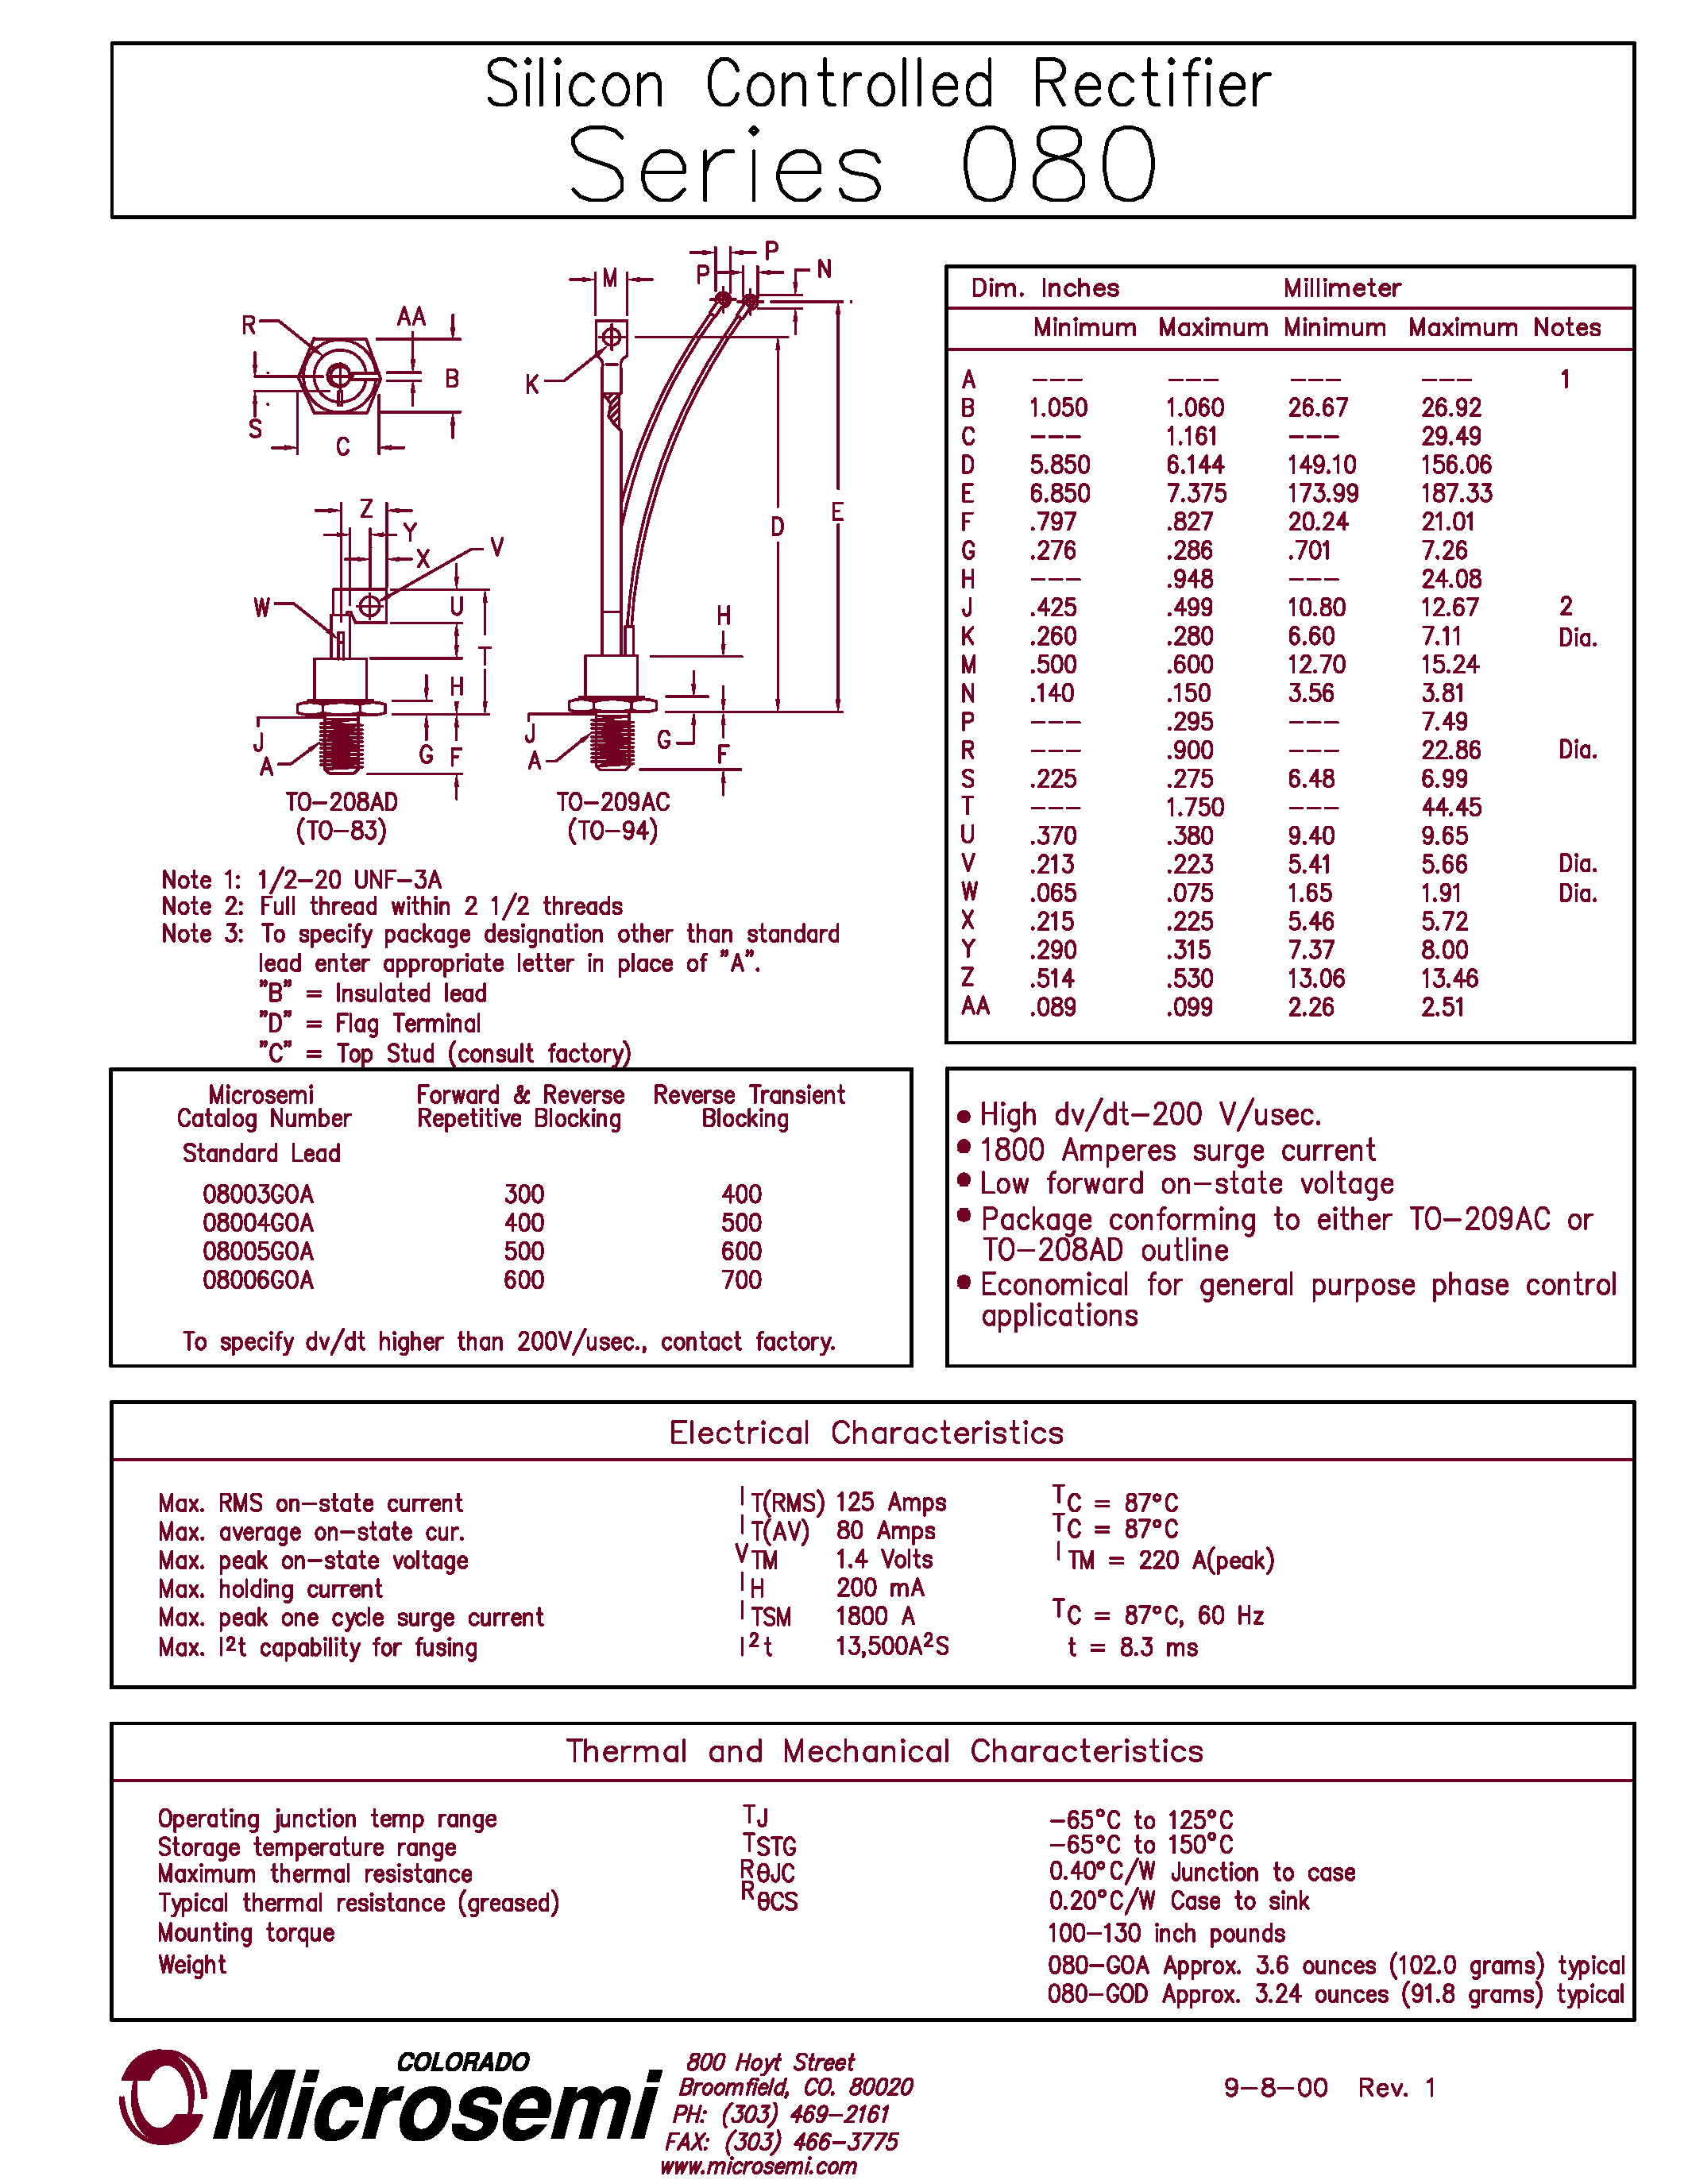 Datasheet 08006GOD - Silicon Controlled Rectifier page 1